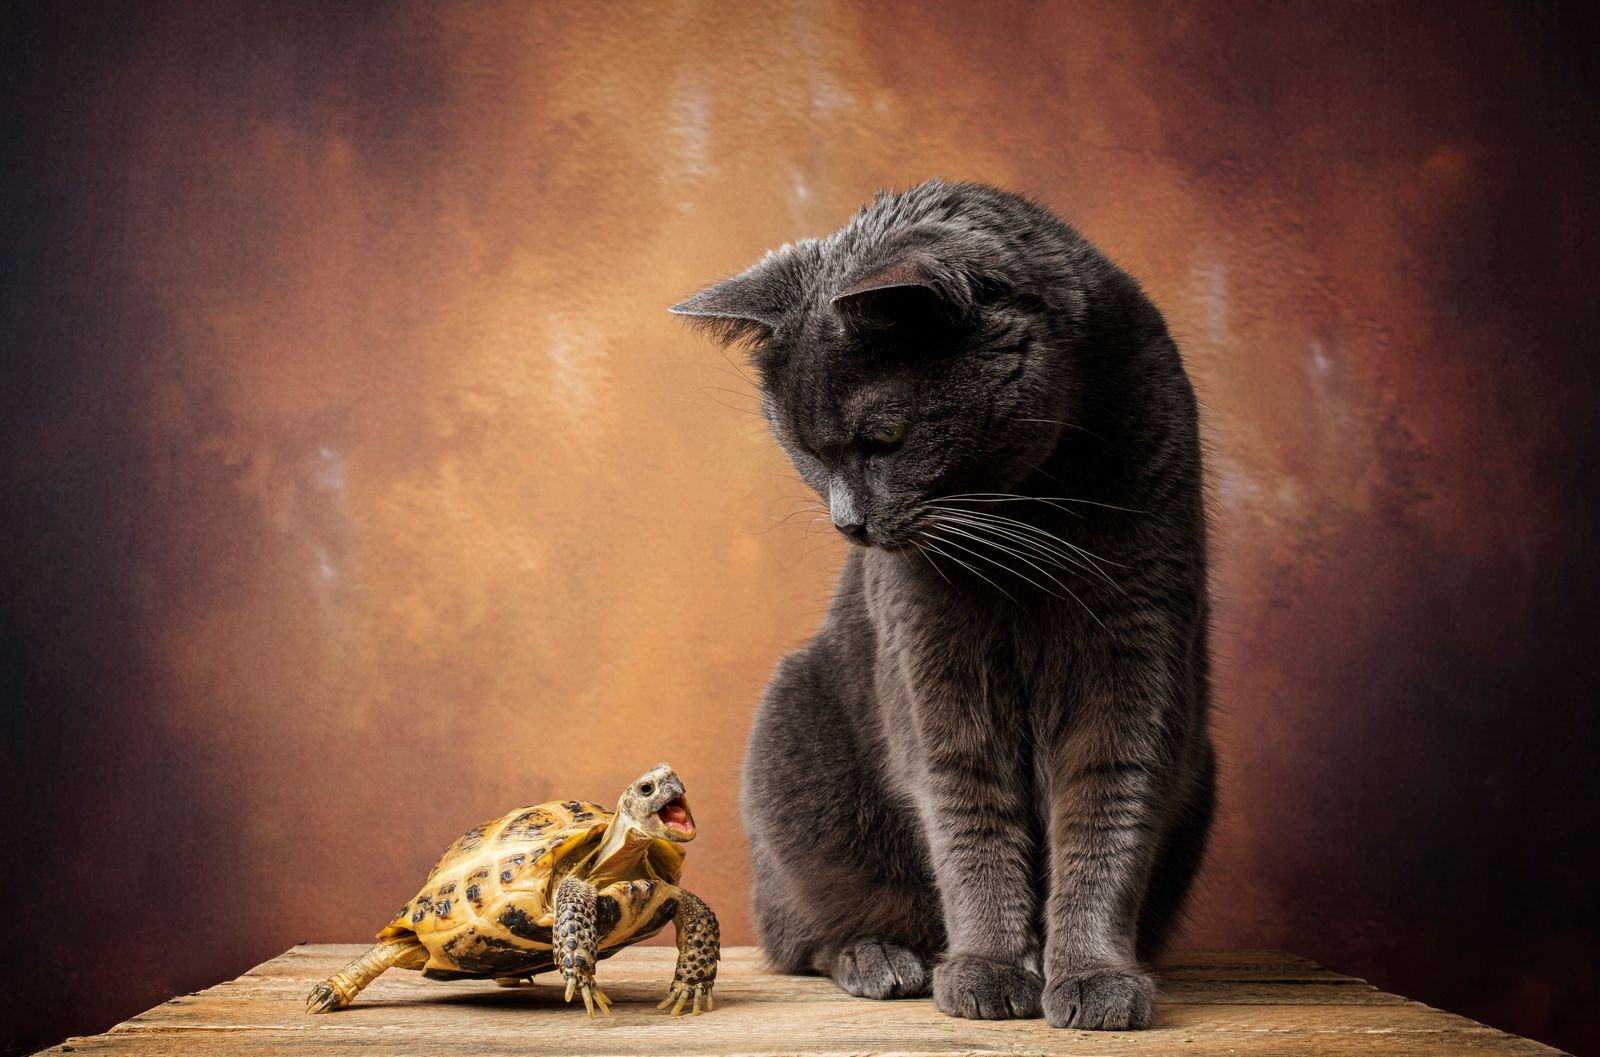 The Cat & The Tortoise